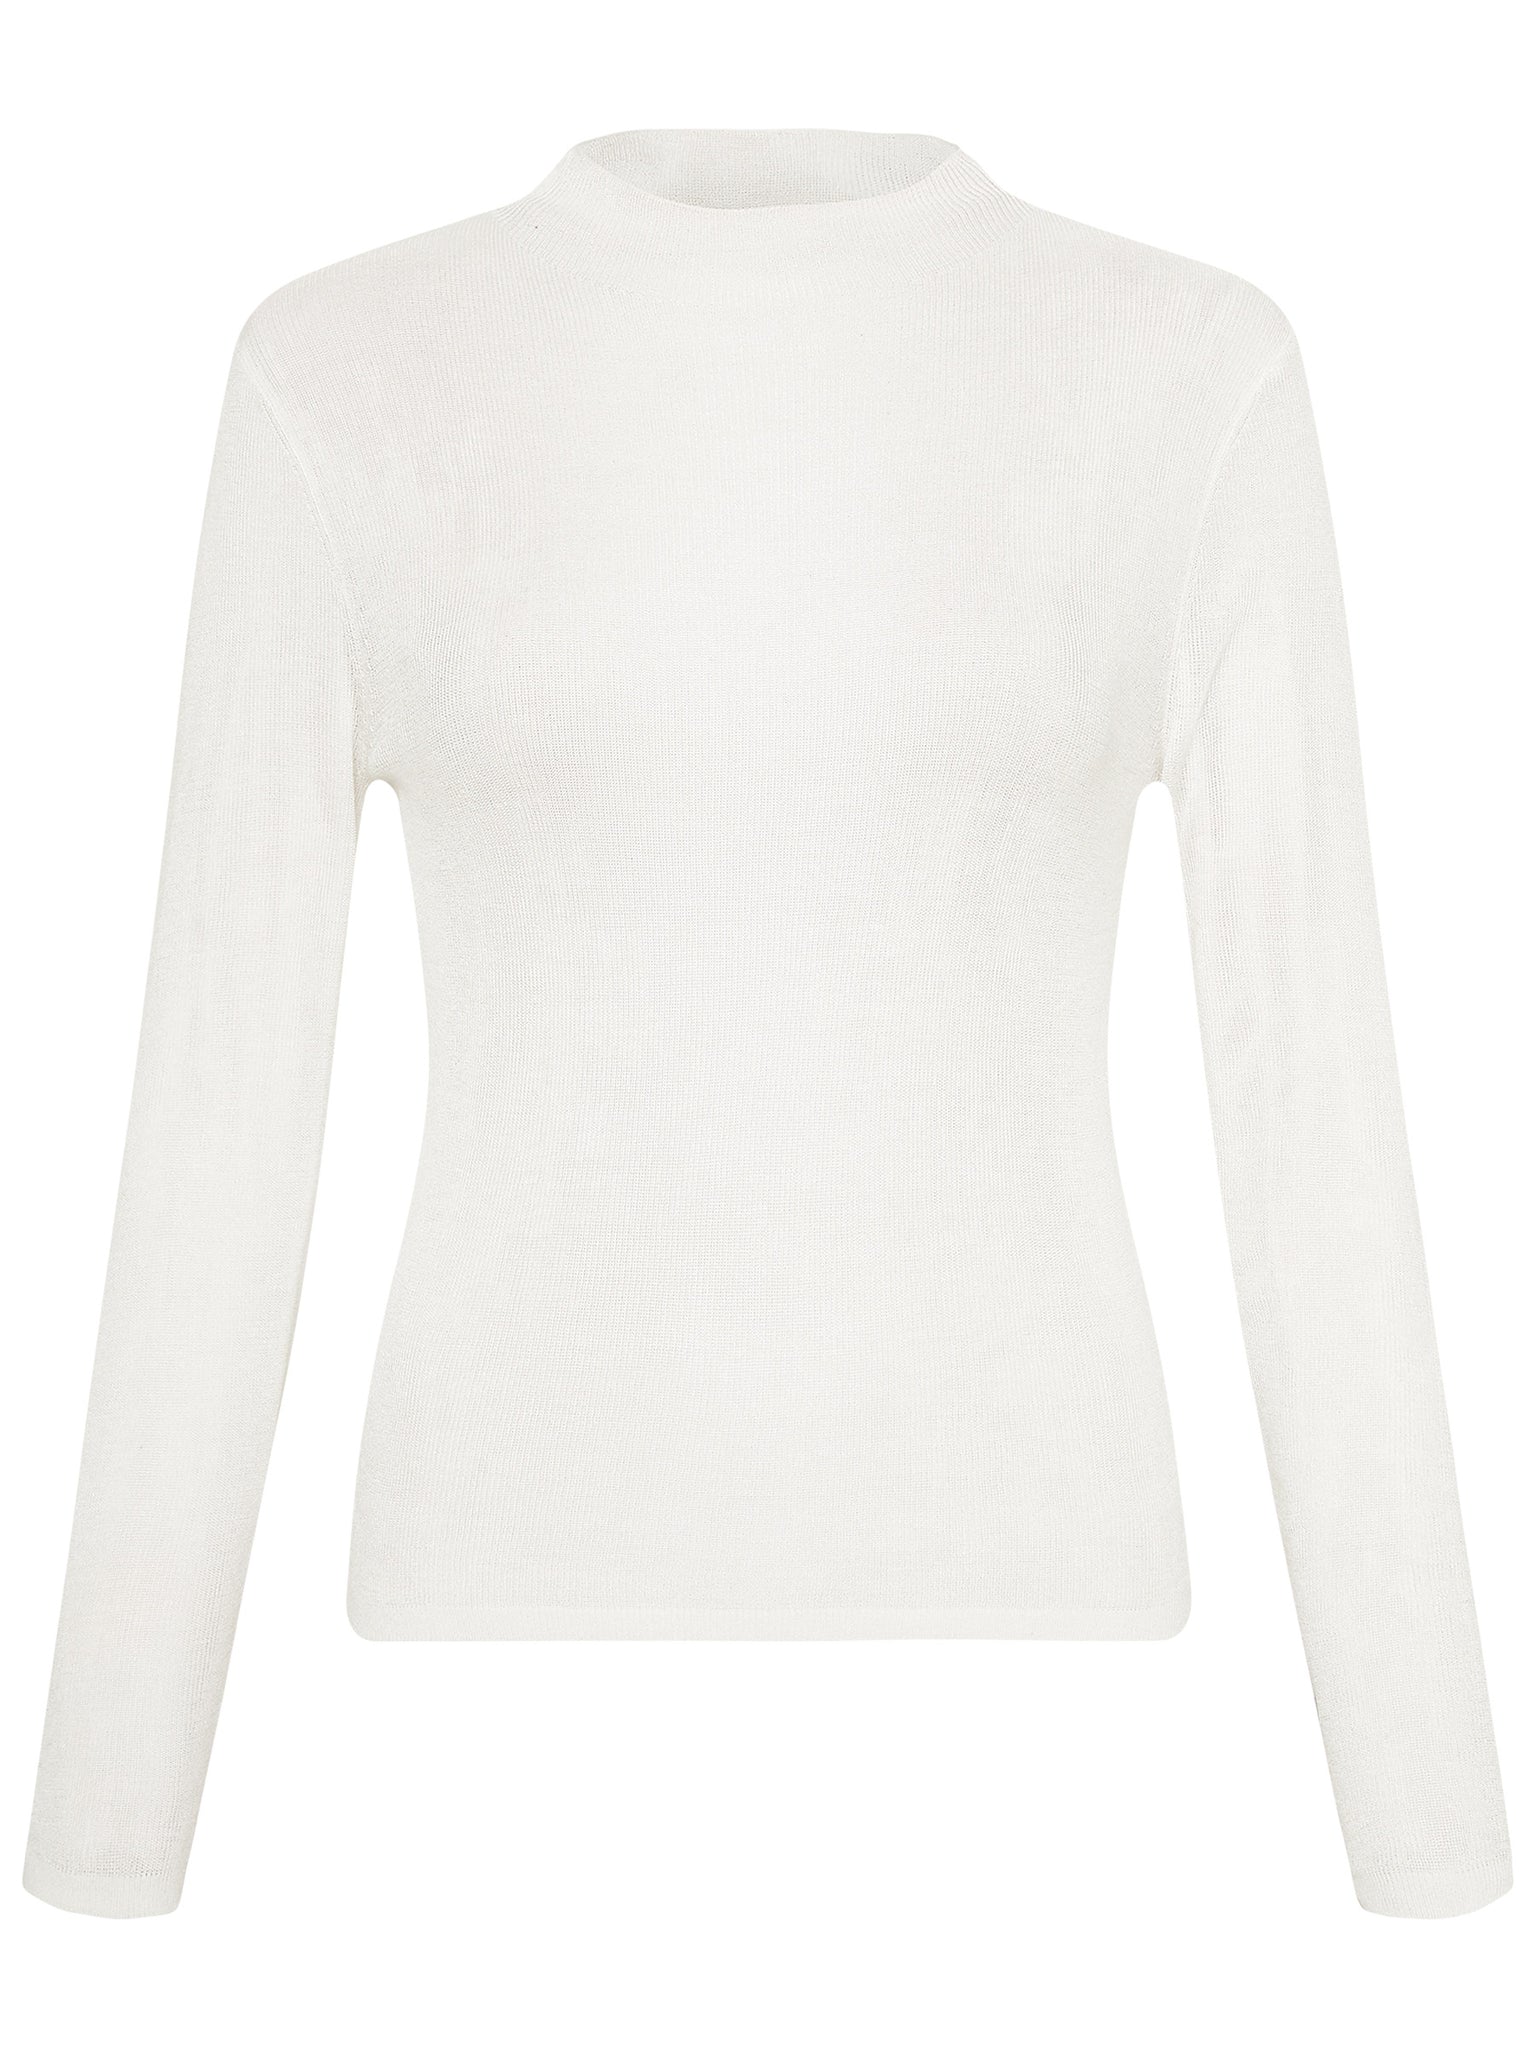 St. Agni | Long Sleeve High Neck Knit Top in White | The UNDONE by St. Agni